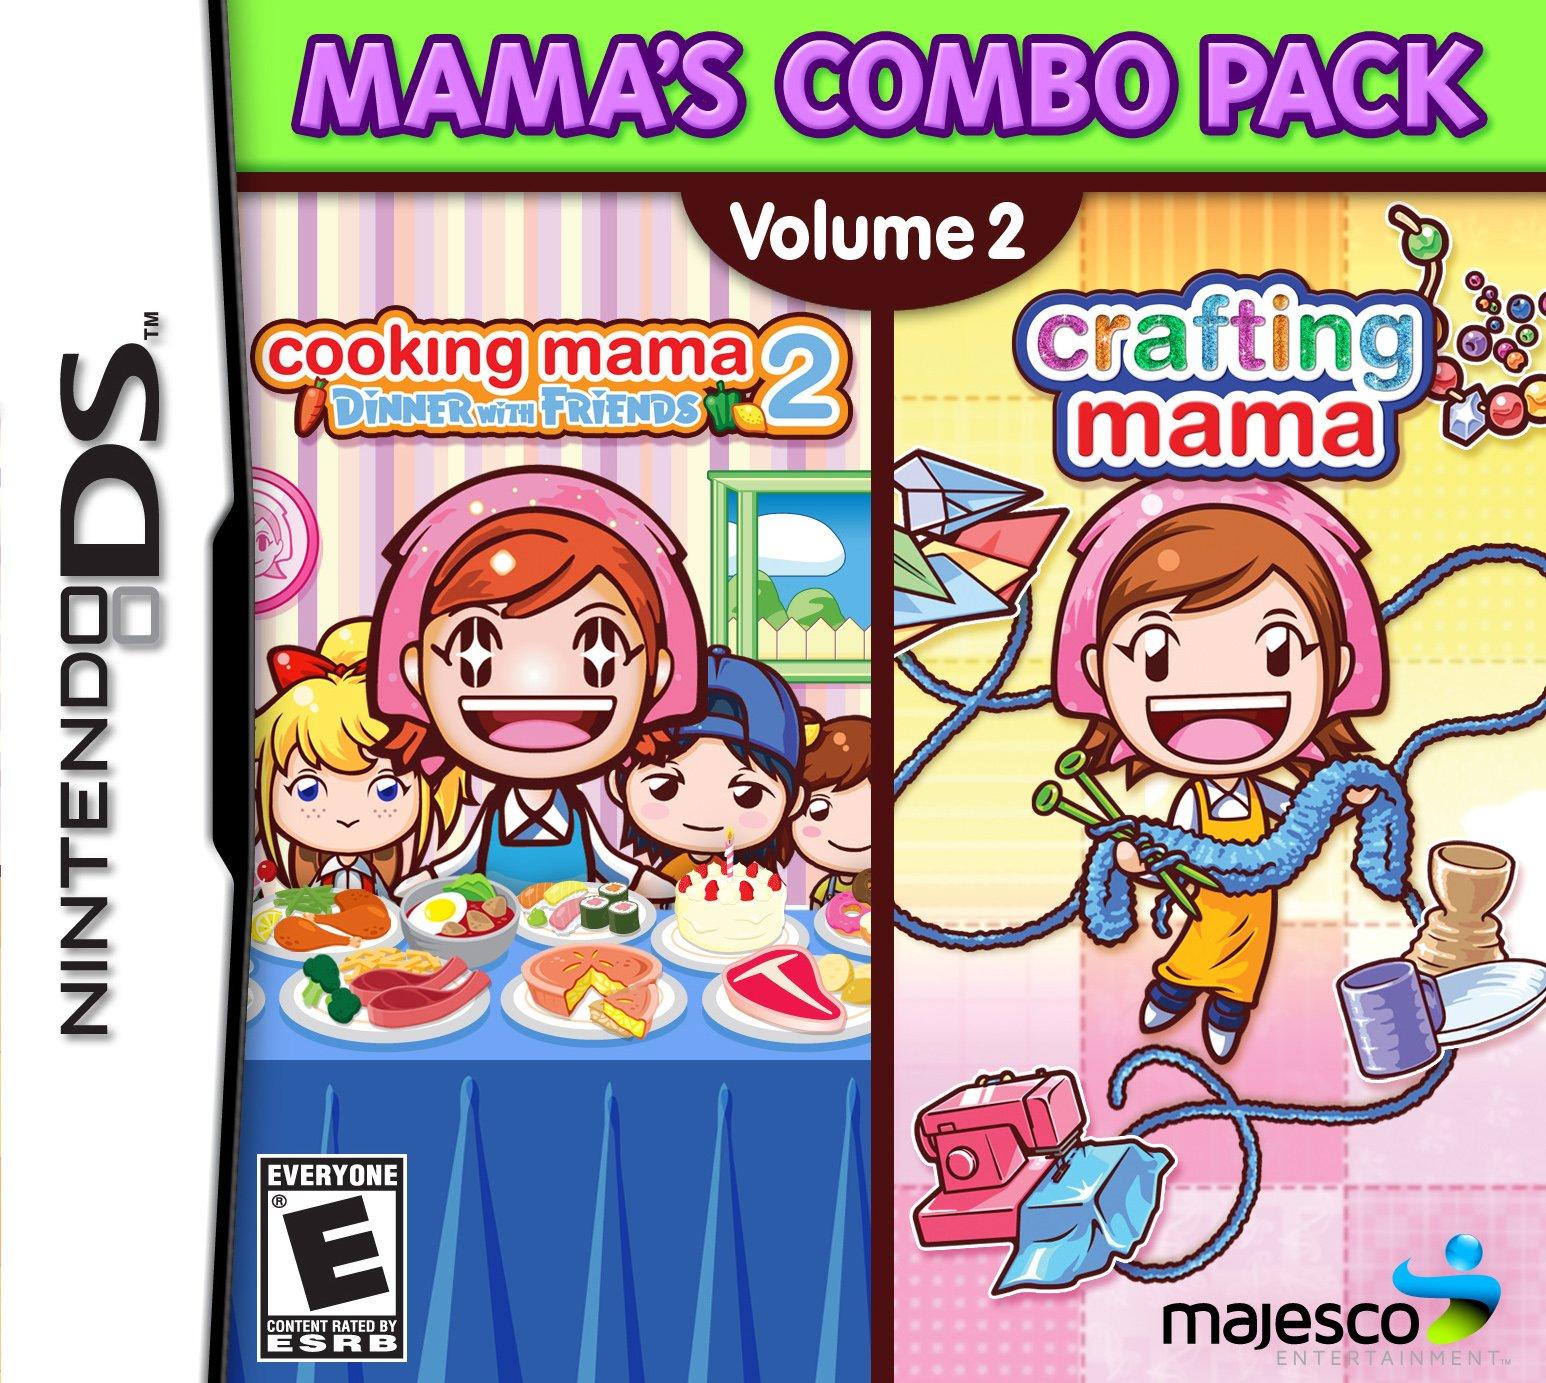 Cooking Mama's Combo Pack Volume 2